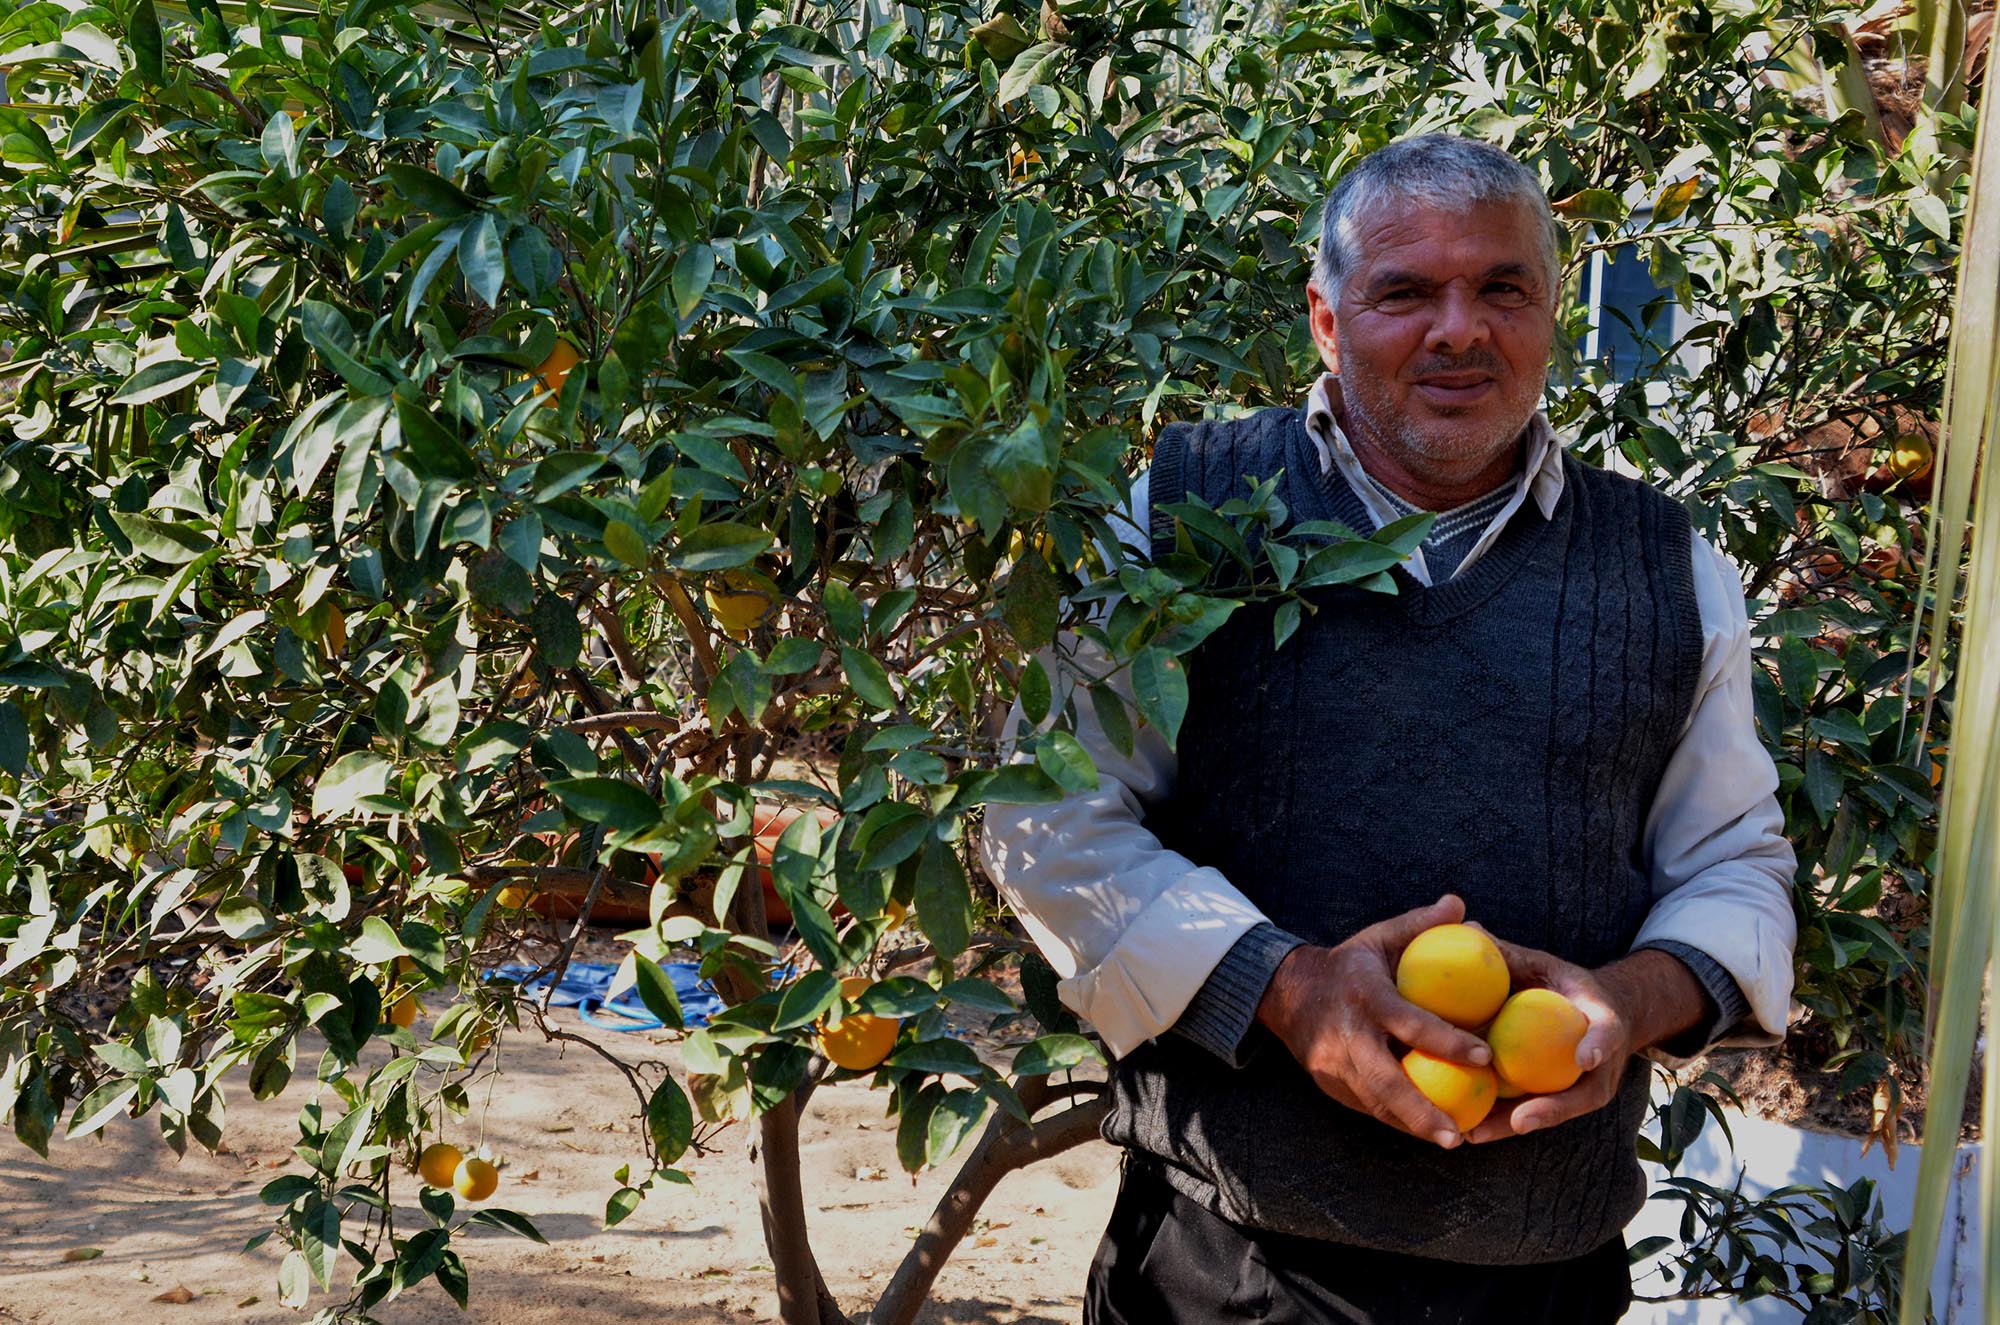 Shihab says he is always found under this orange tree in Gaza.